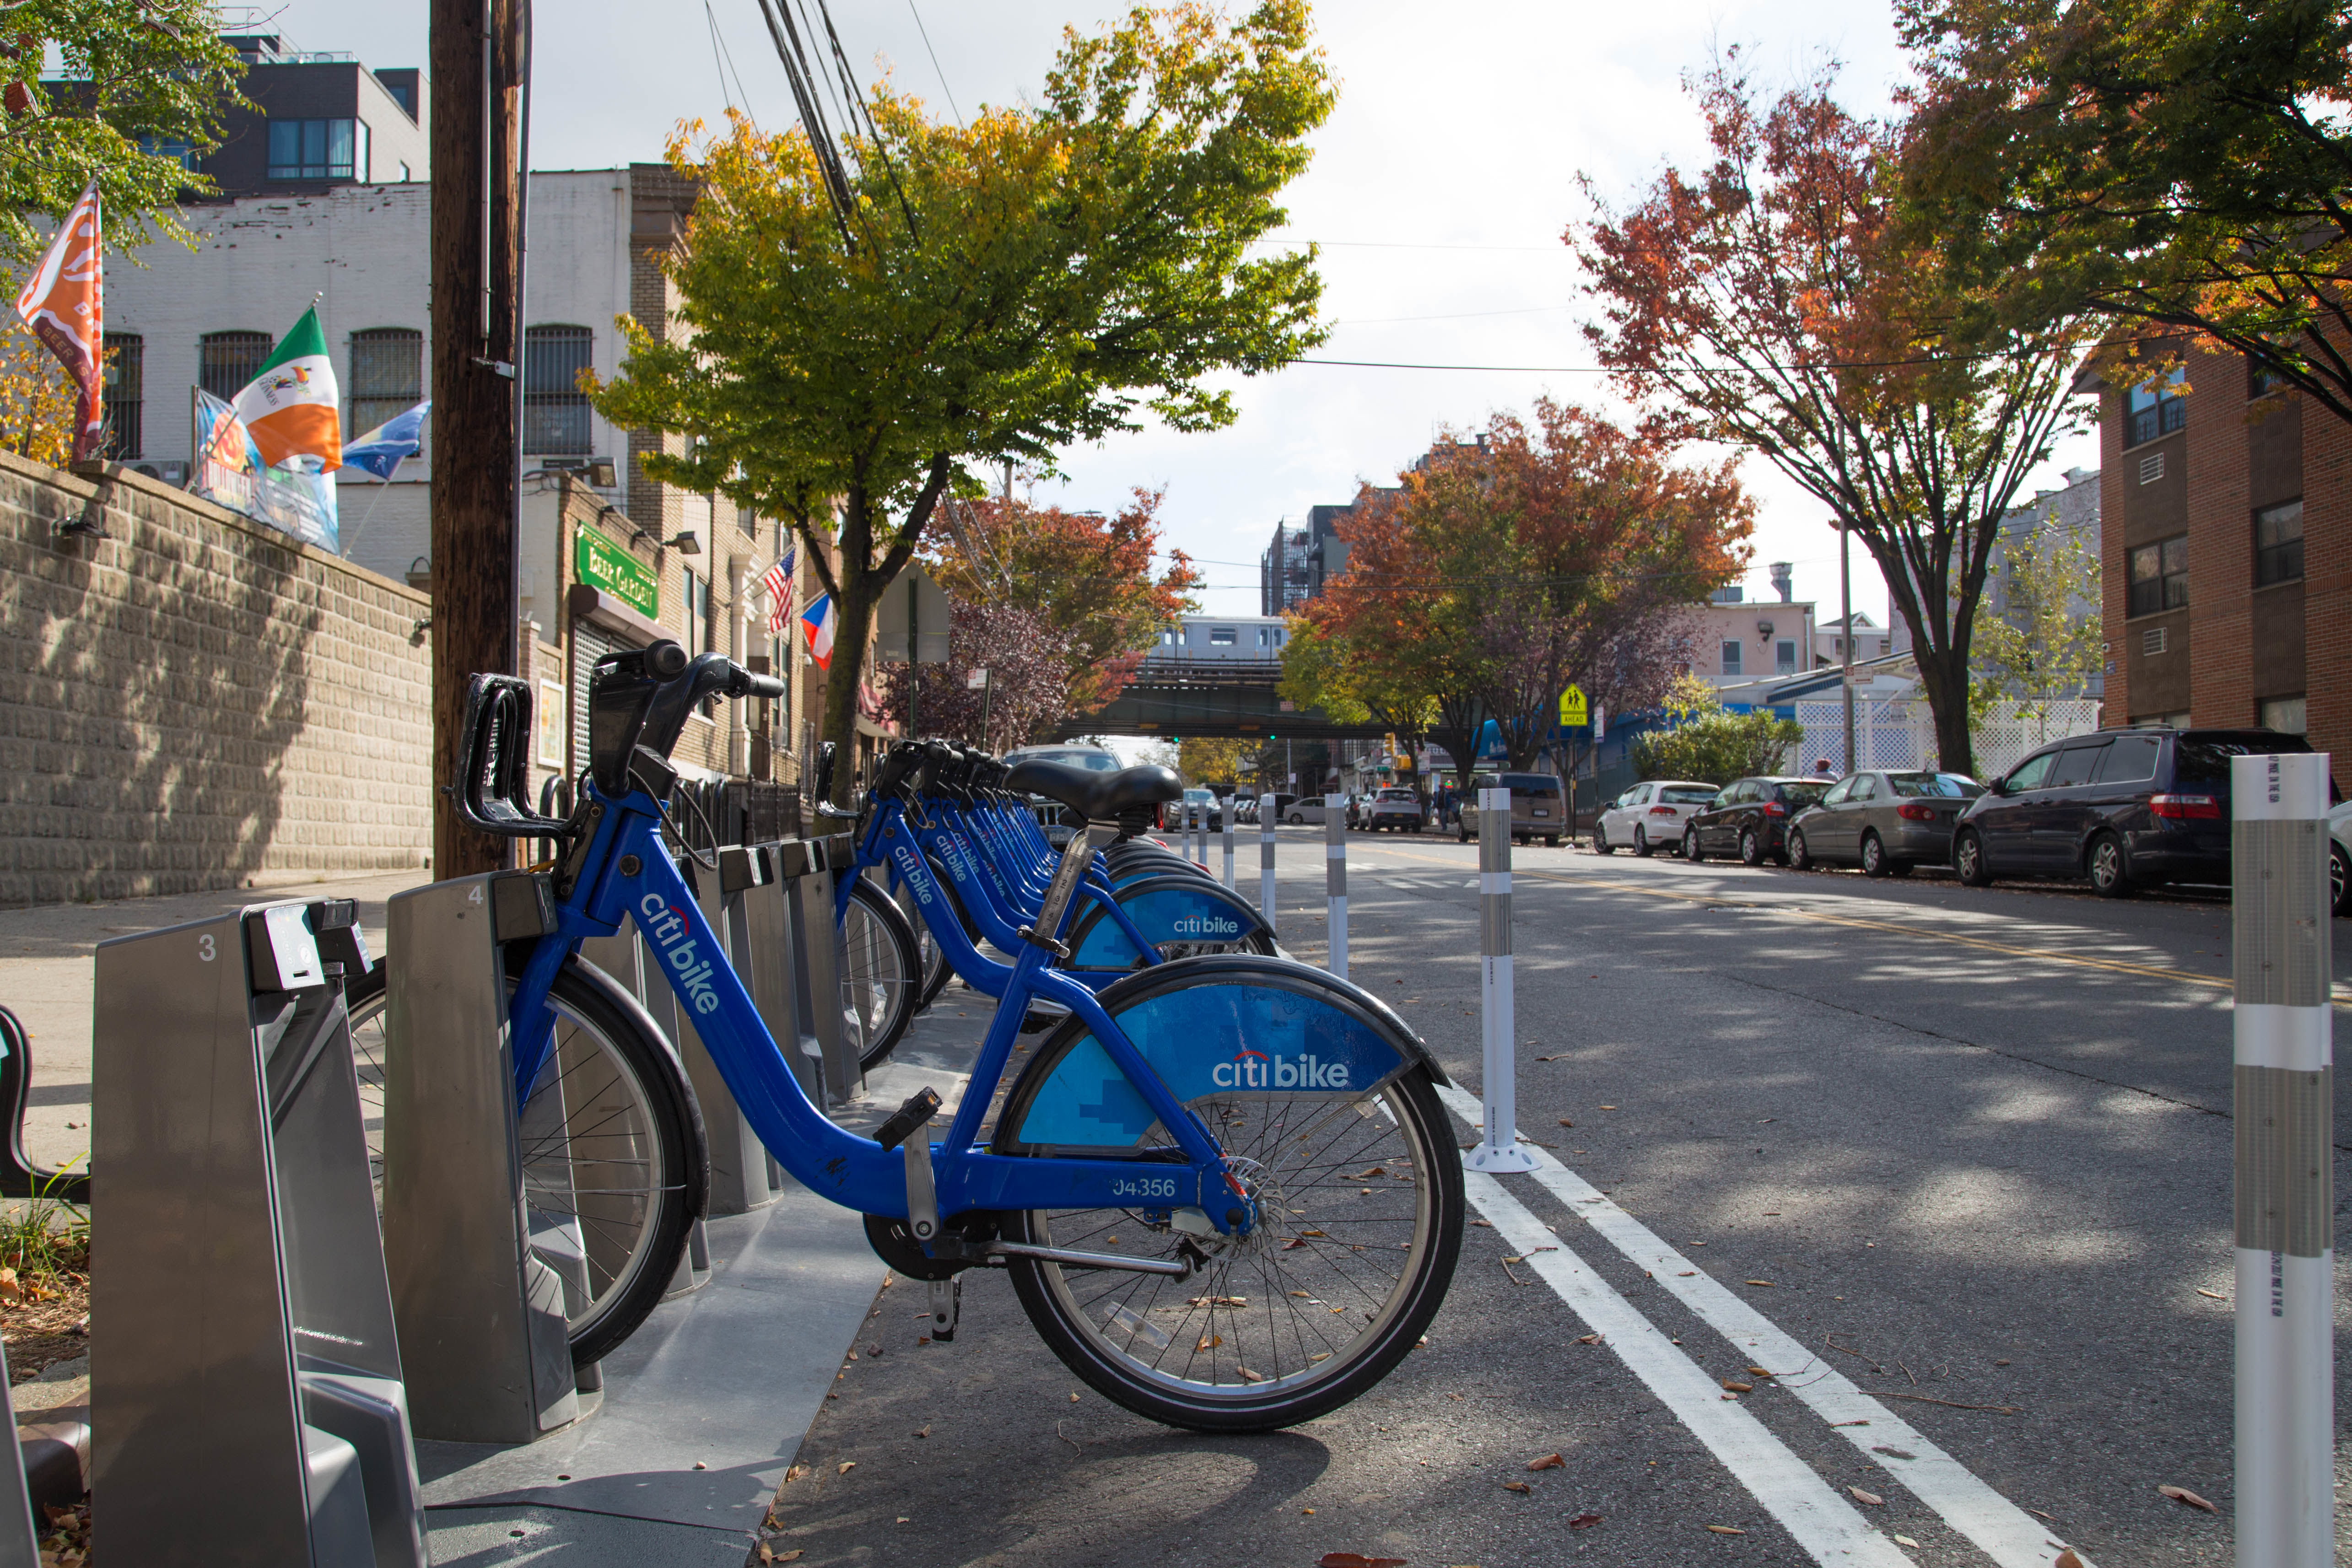 Citi Bike Phase 3 Expansion Projects & Initiatives